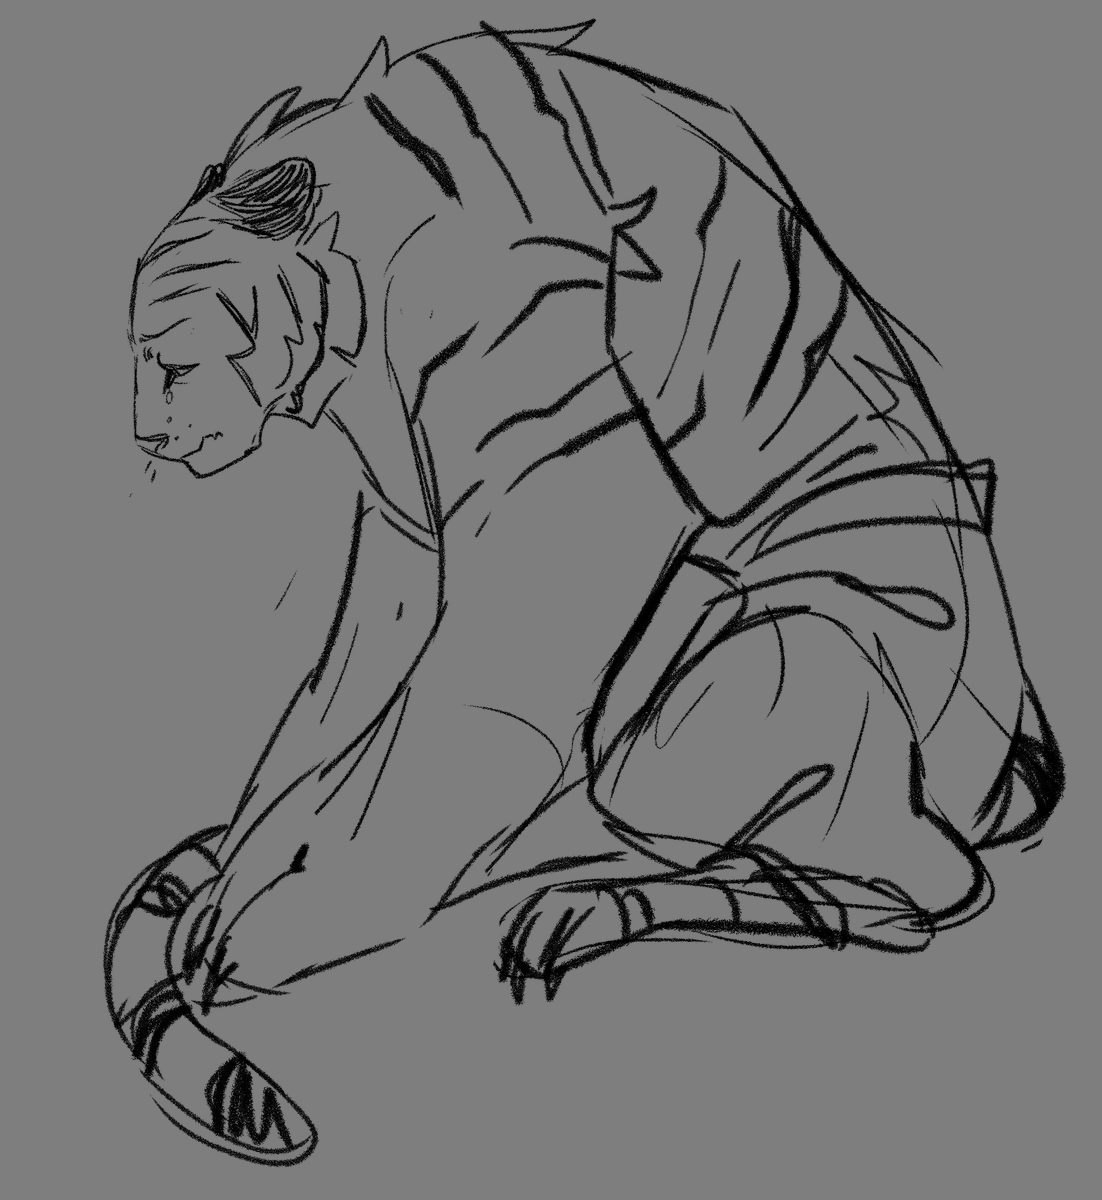 wtf,,,gay little tiger? ?????

well that session was gayer than expected :^) oops 